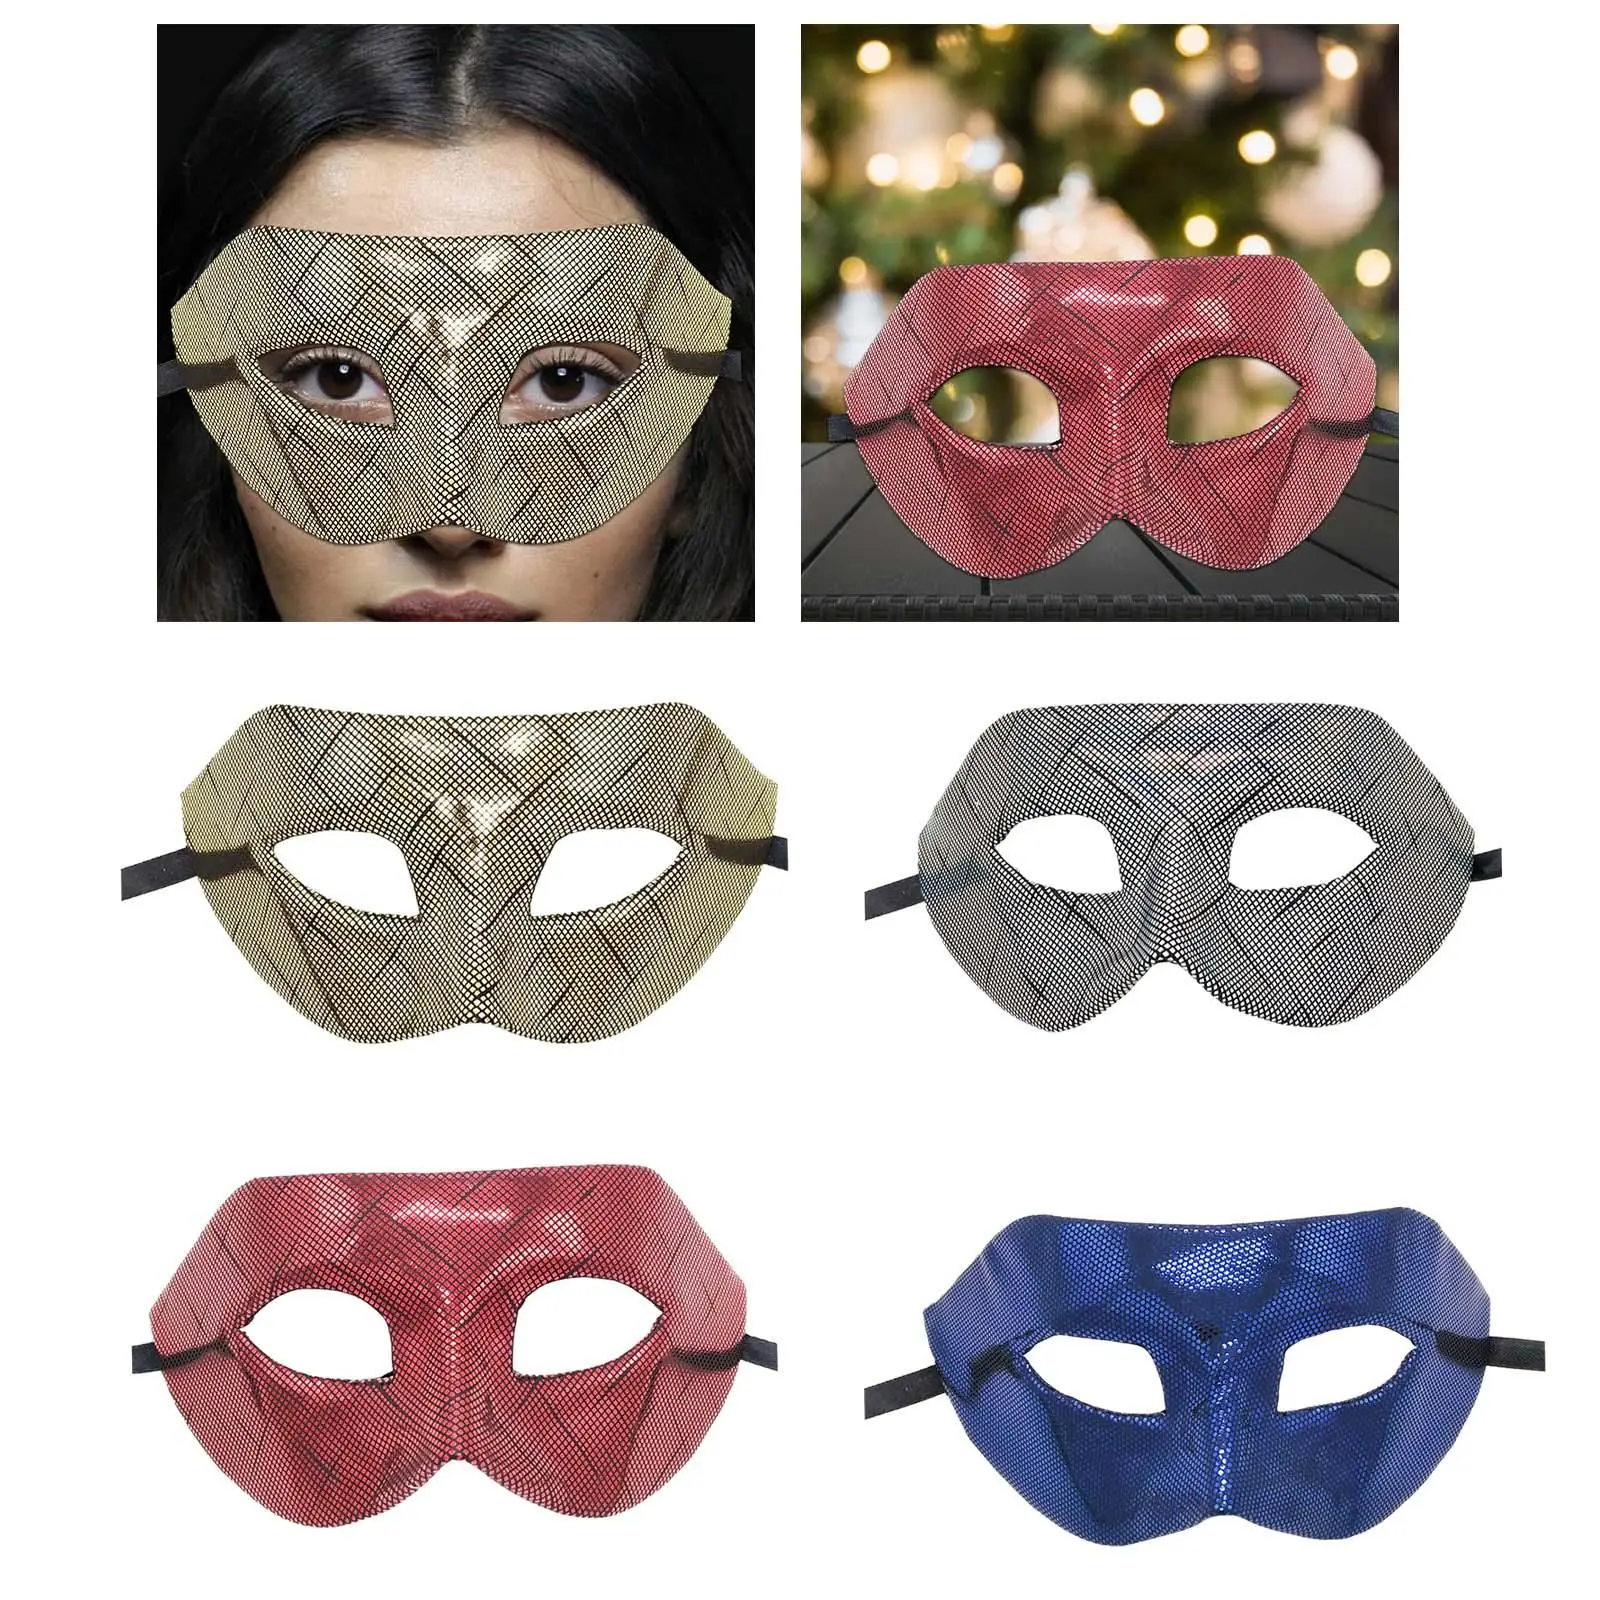 Masquerade Mask Cosplay Eye Mask Half Face Mask for Holiday Fancy Dress